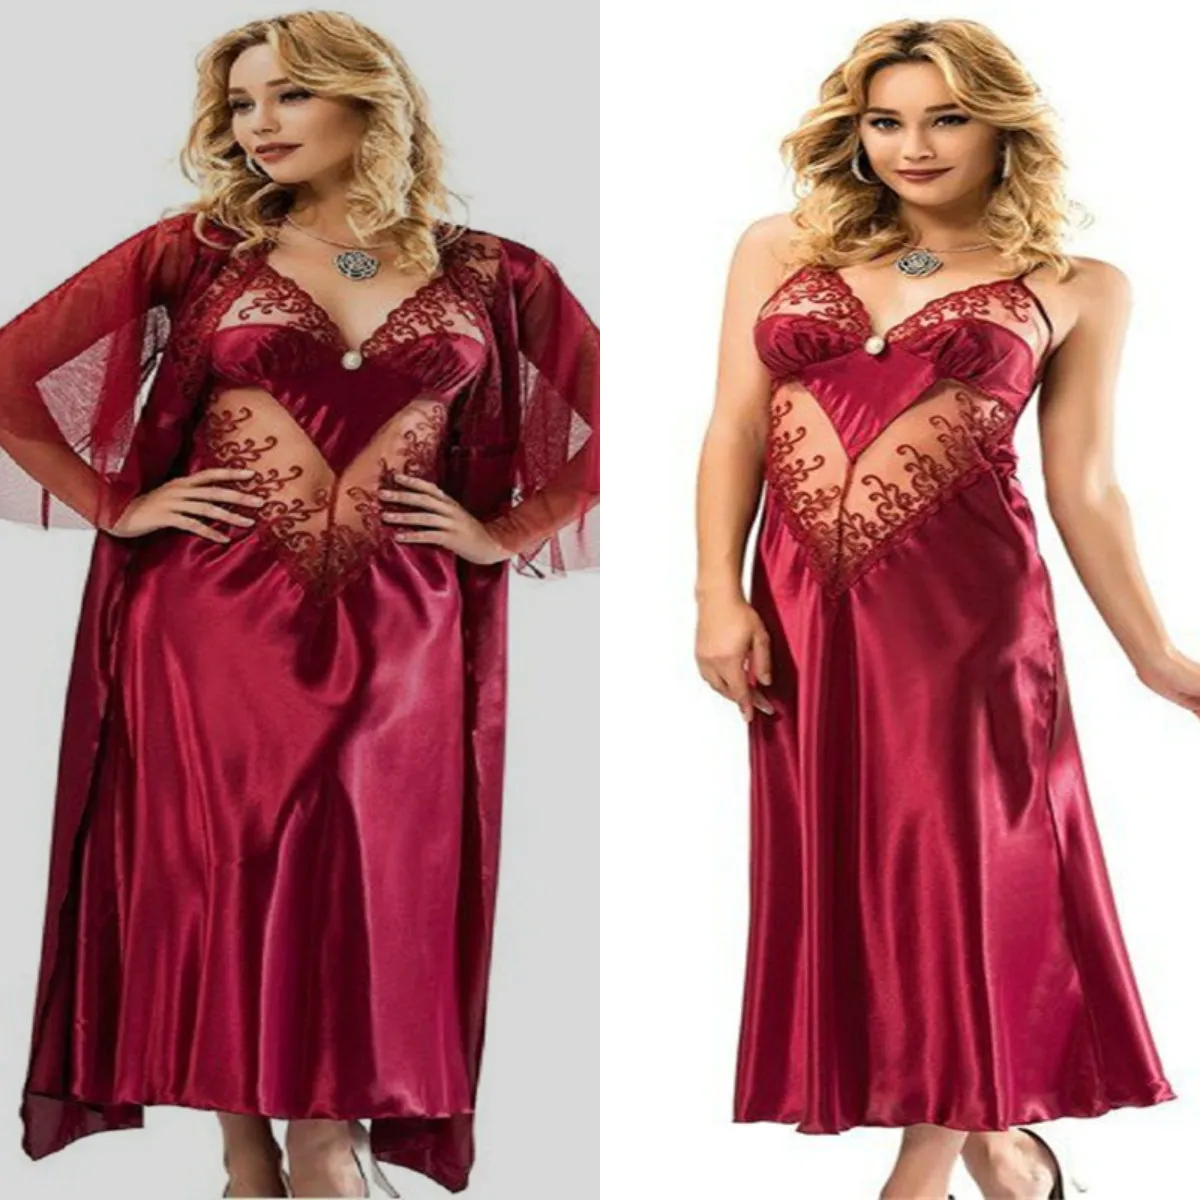 Red Two Piece Wedding Robes Spaghetti Strap Sleeveless Appliqued Lace Bridesmaid Robe Satin Silk Ruched See Through Night Gown For Women